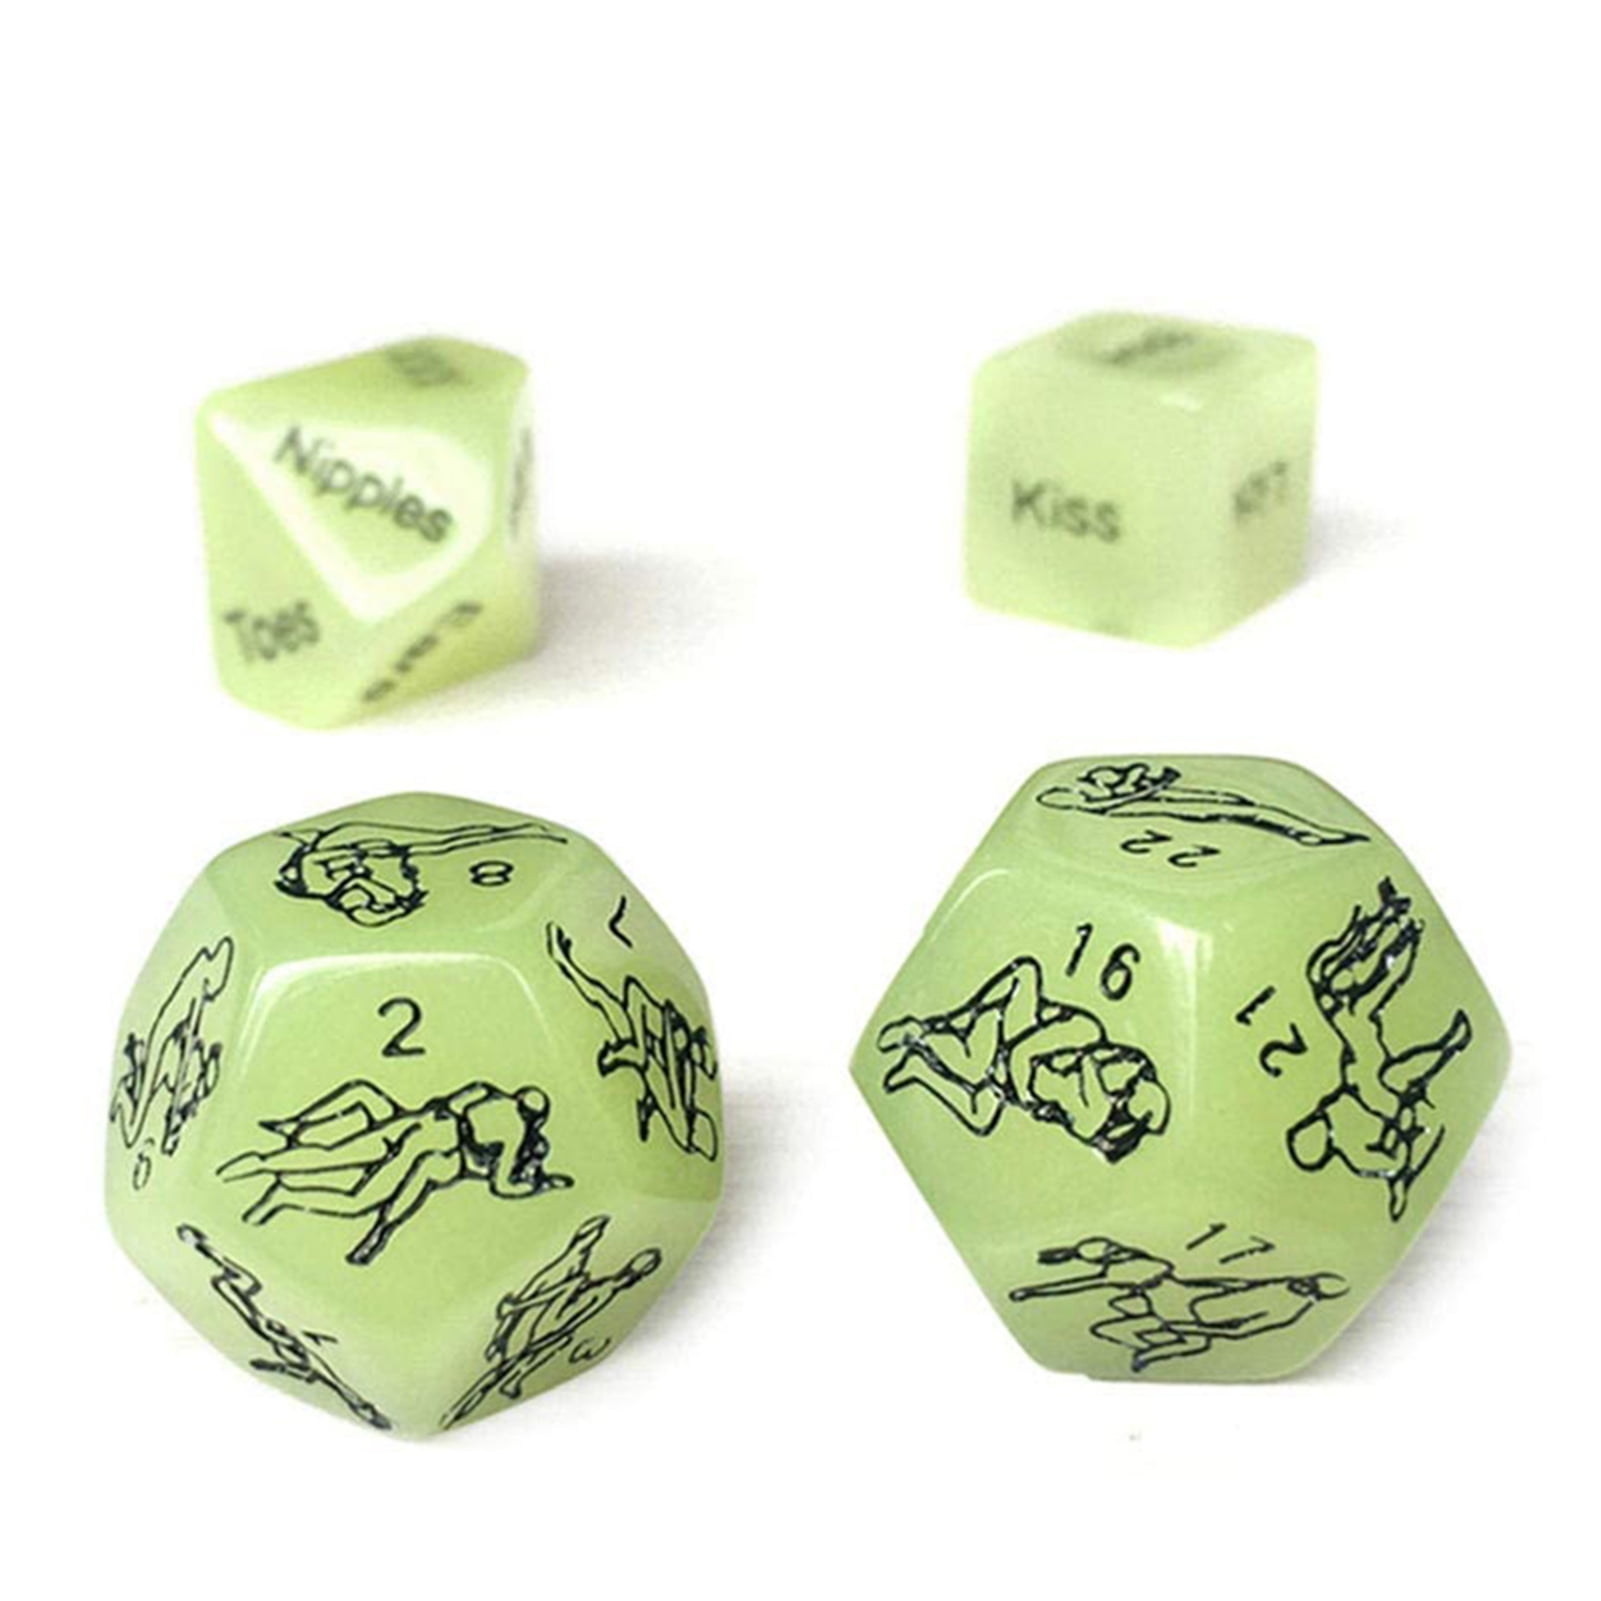 4pcs/set Sides Funny Dice Game Toy Set Adult Couple Bachelor Party Gift Love